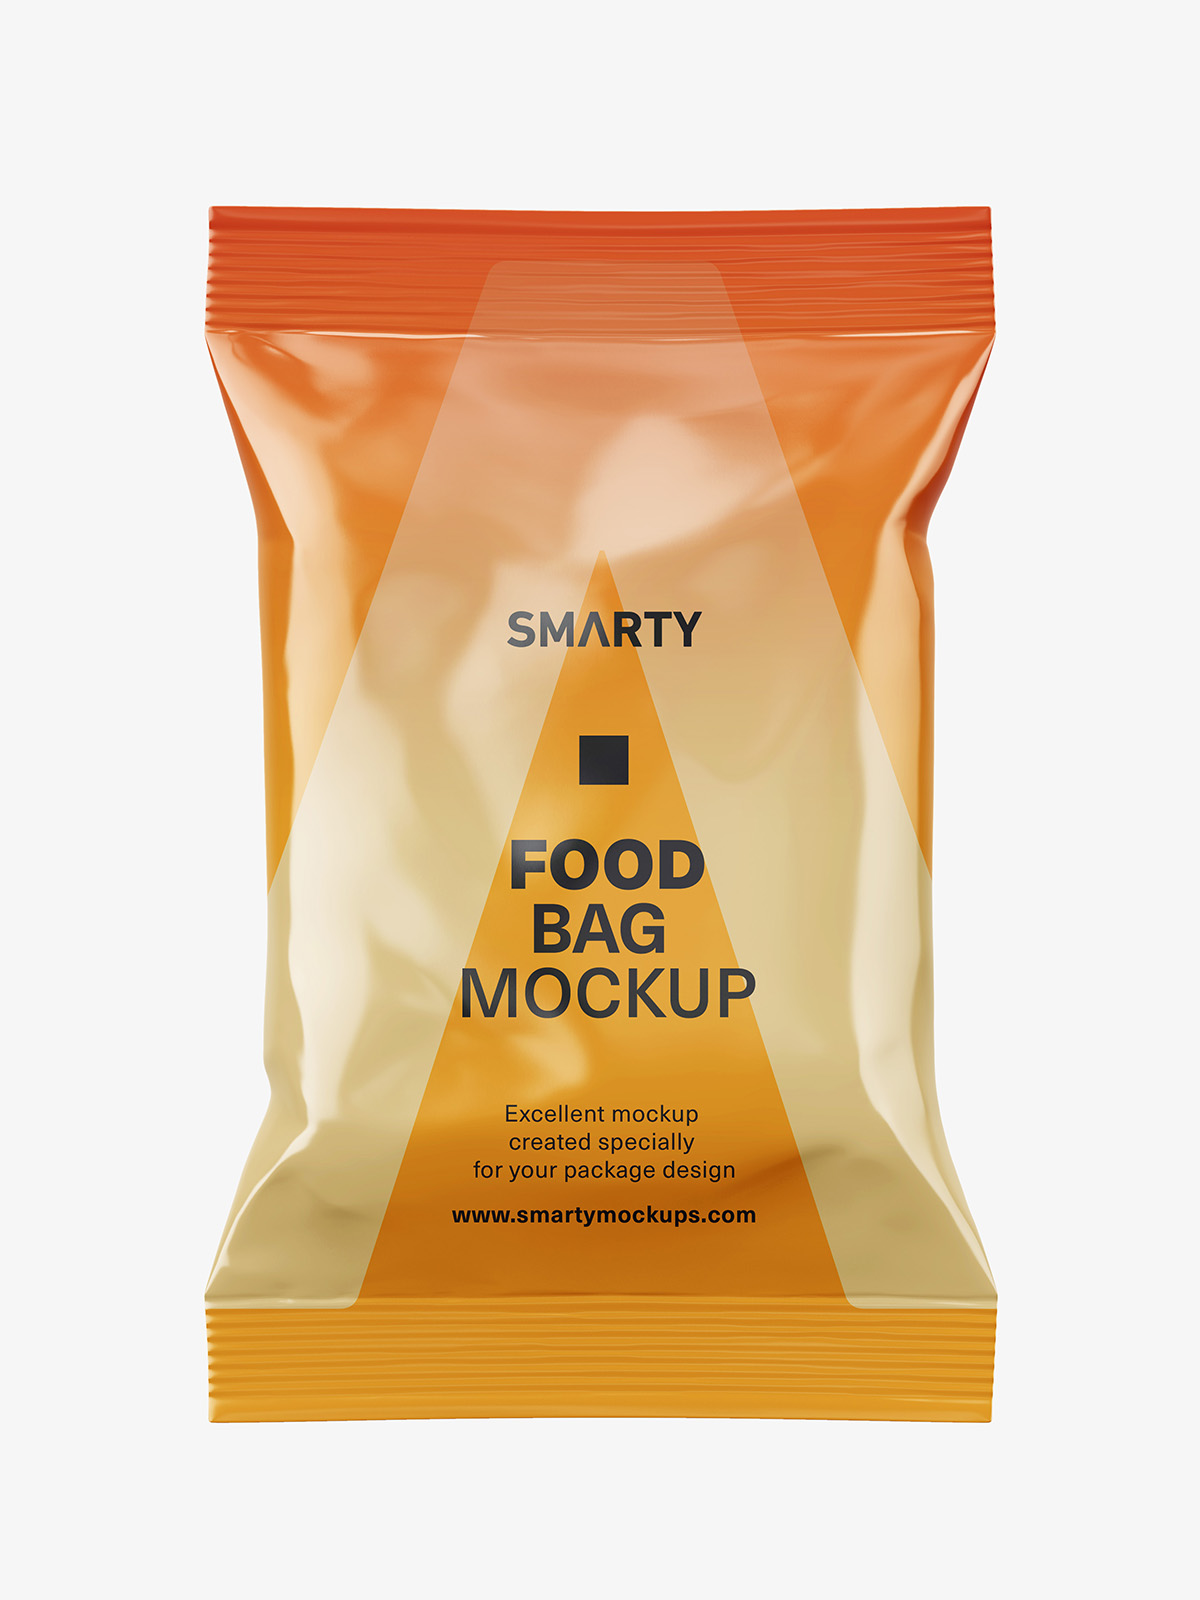 Download Food pouch mockup / glossy - Smarty Mockups